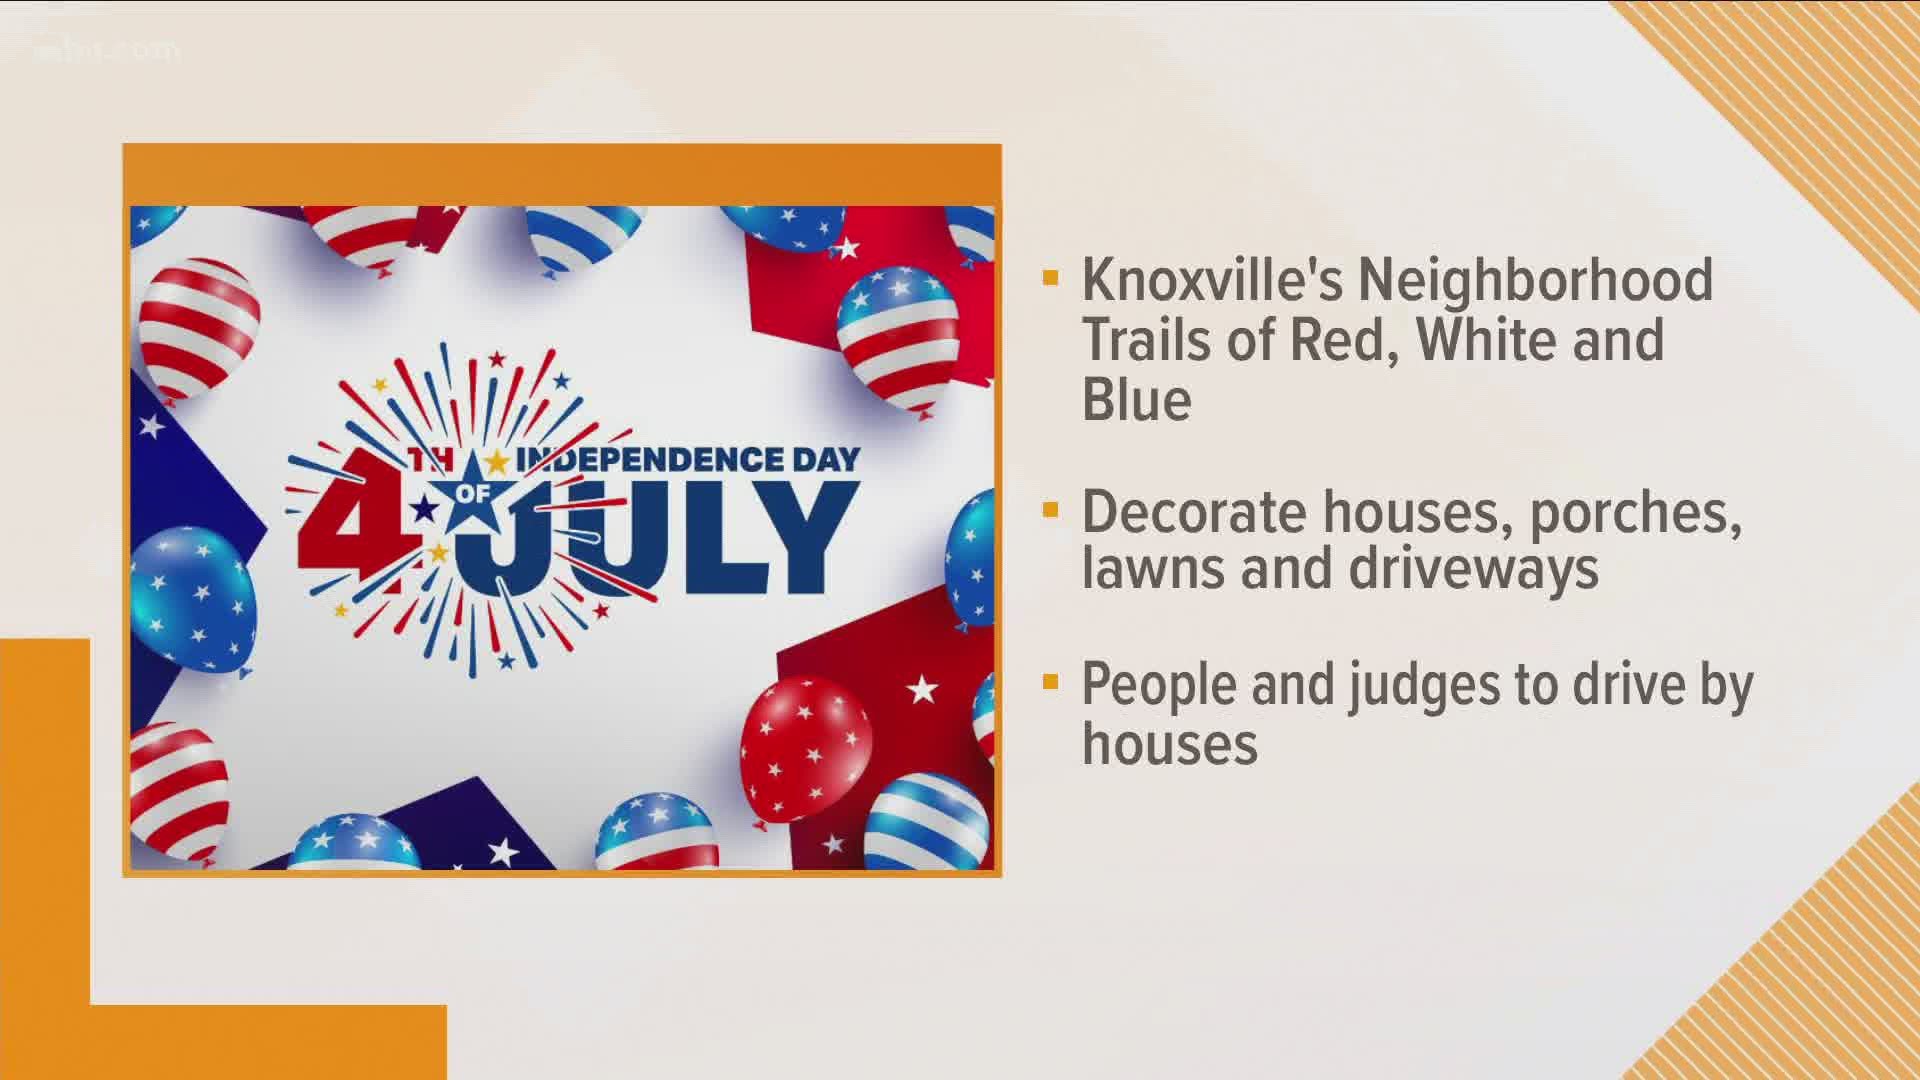 The new plans are called "Knoxville's Neighborhood Trails of Red, White and Blue."